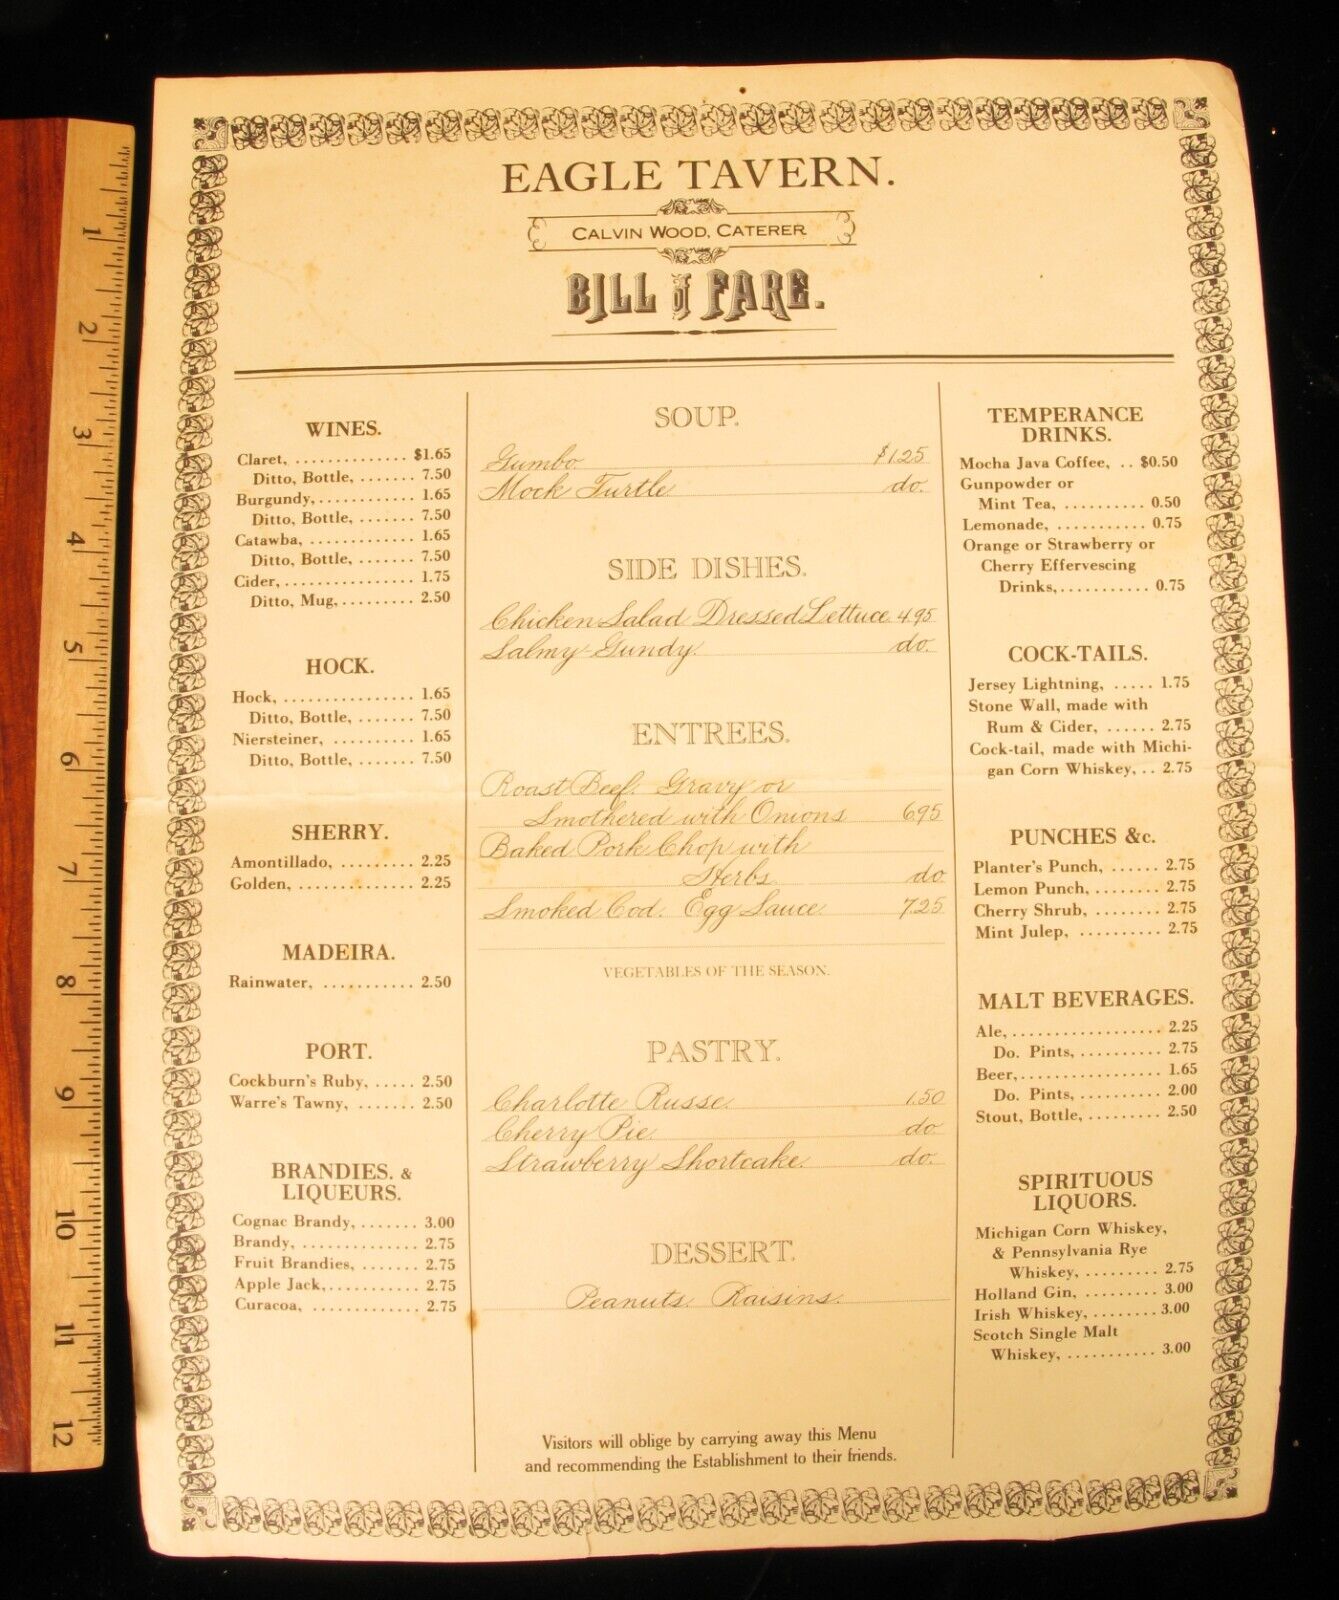 VINTAGE THE EAGLE TAVERN MENU CLINTON MICHIGAN SMOKED COD WITH EGG $7.25 - WOW 